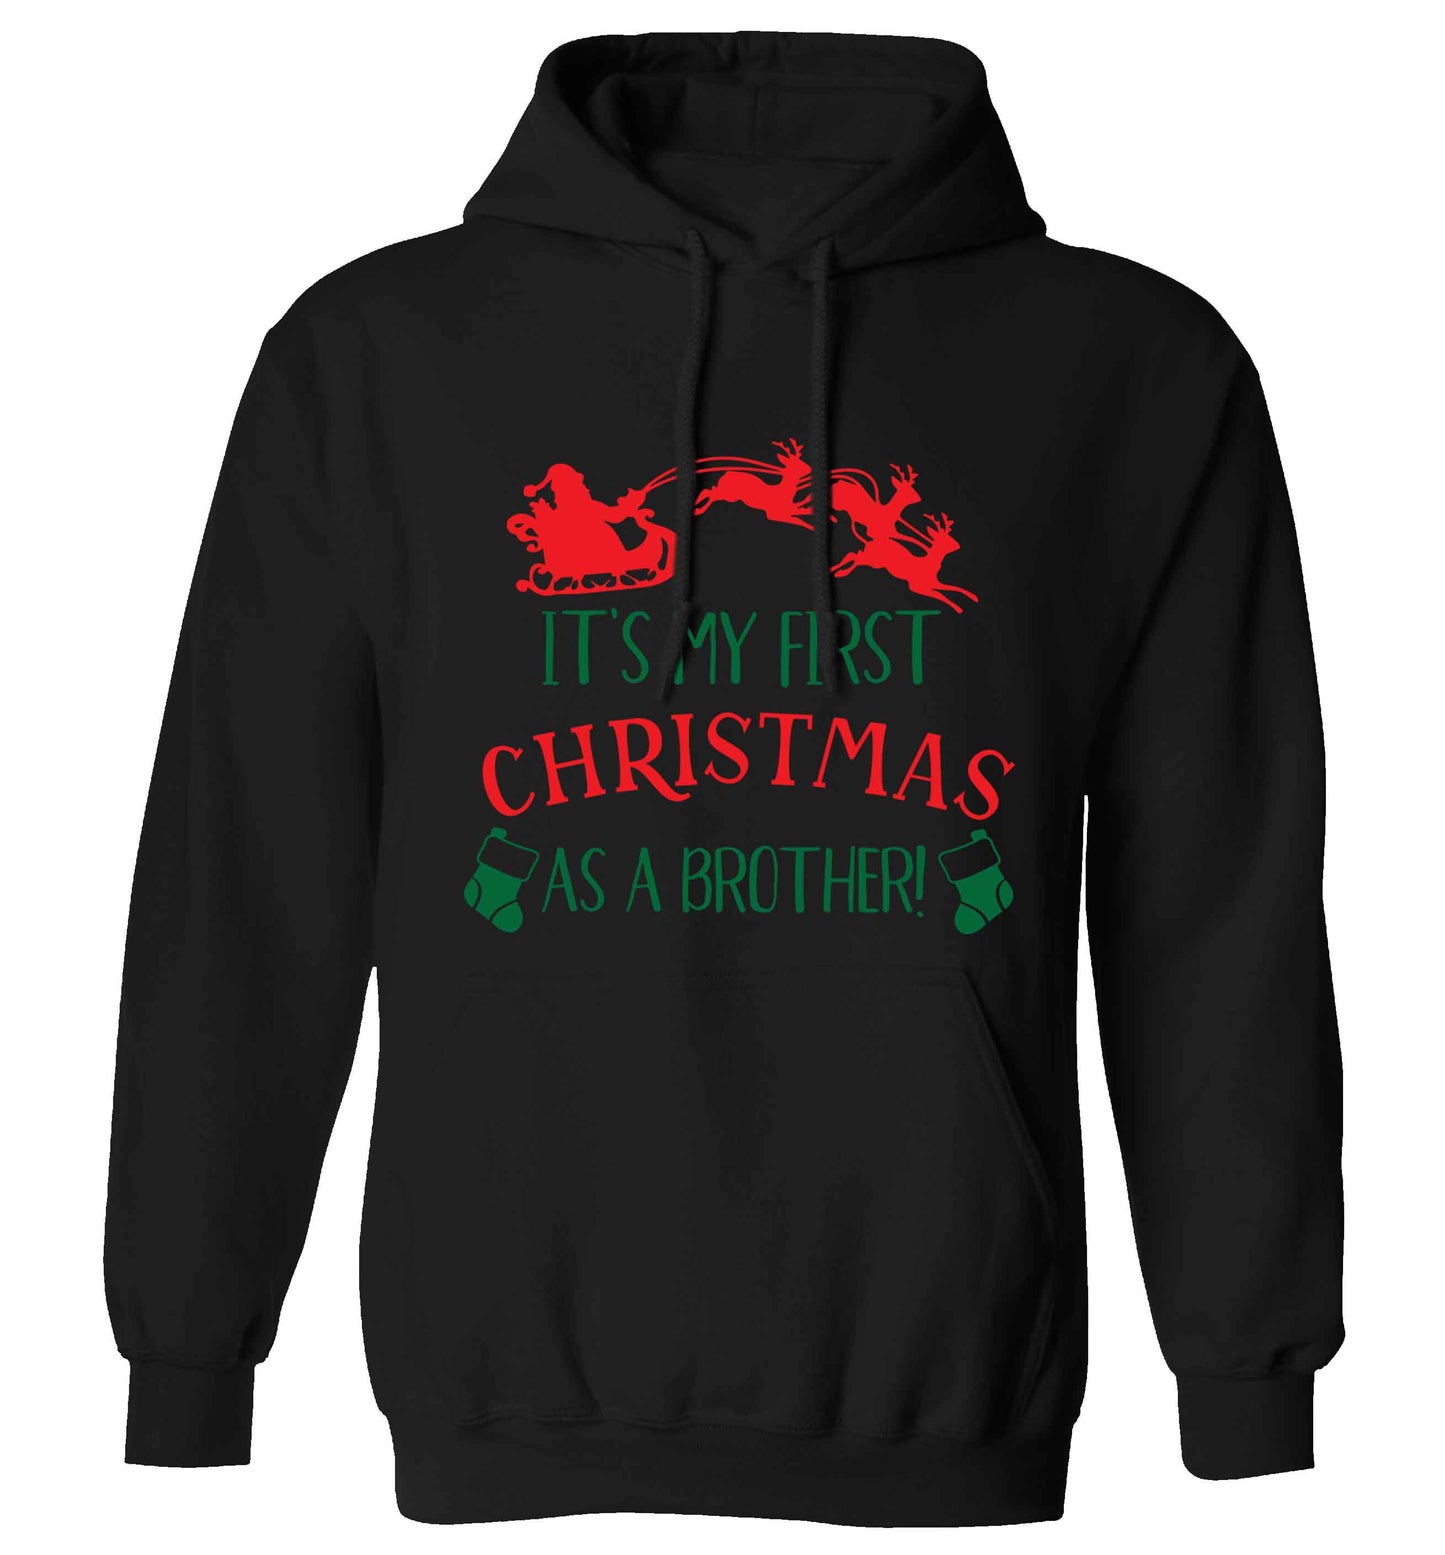 It's my first Christmas as a brother! adults unisex black hoodie 2XL